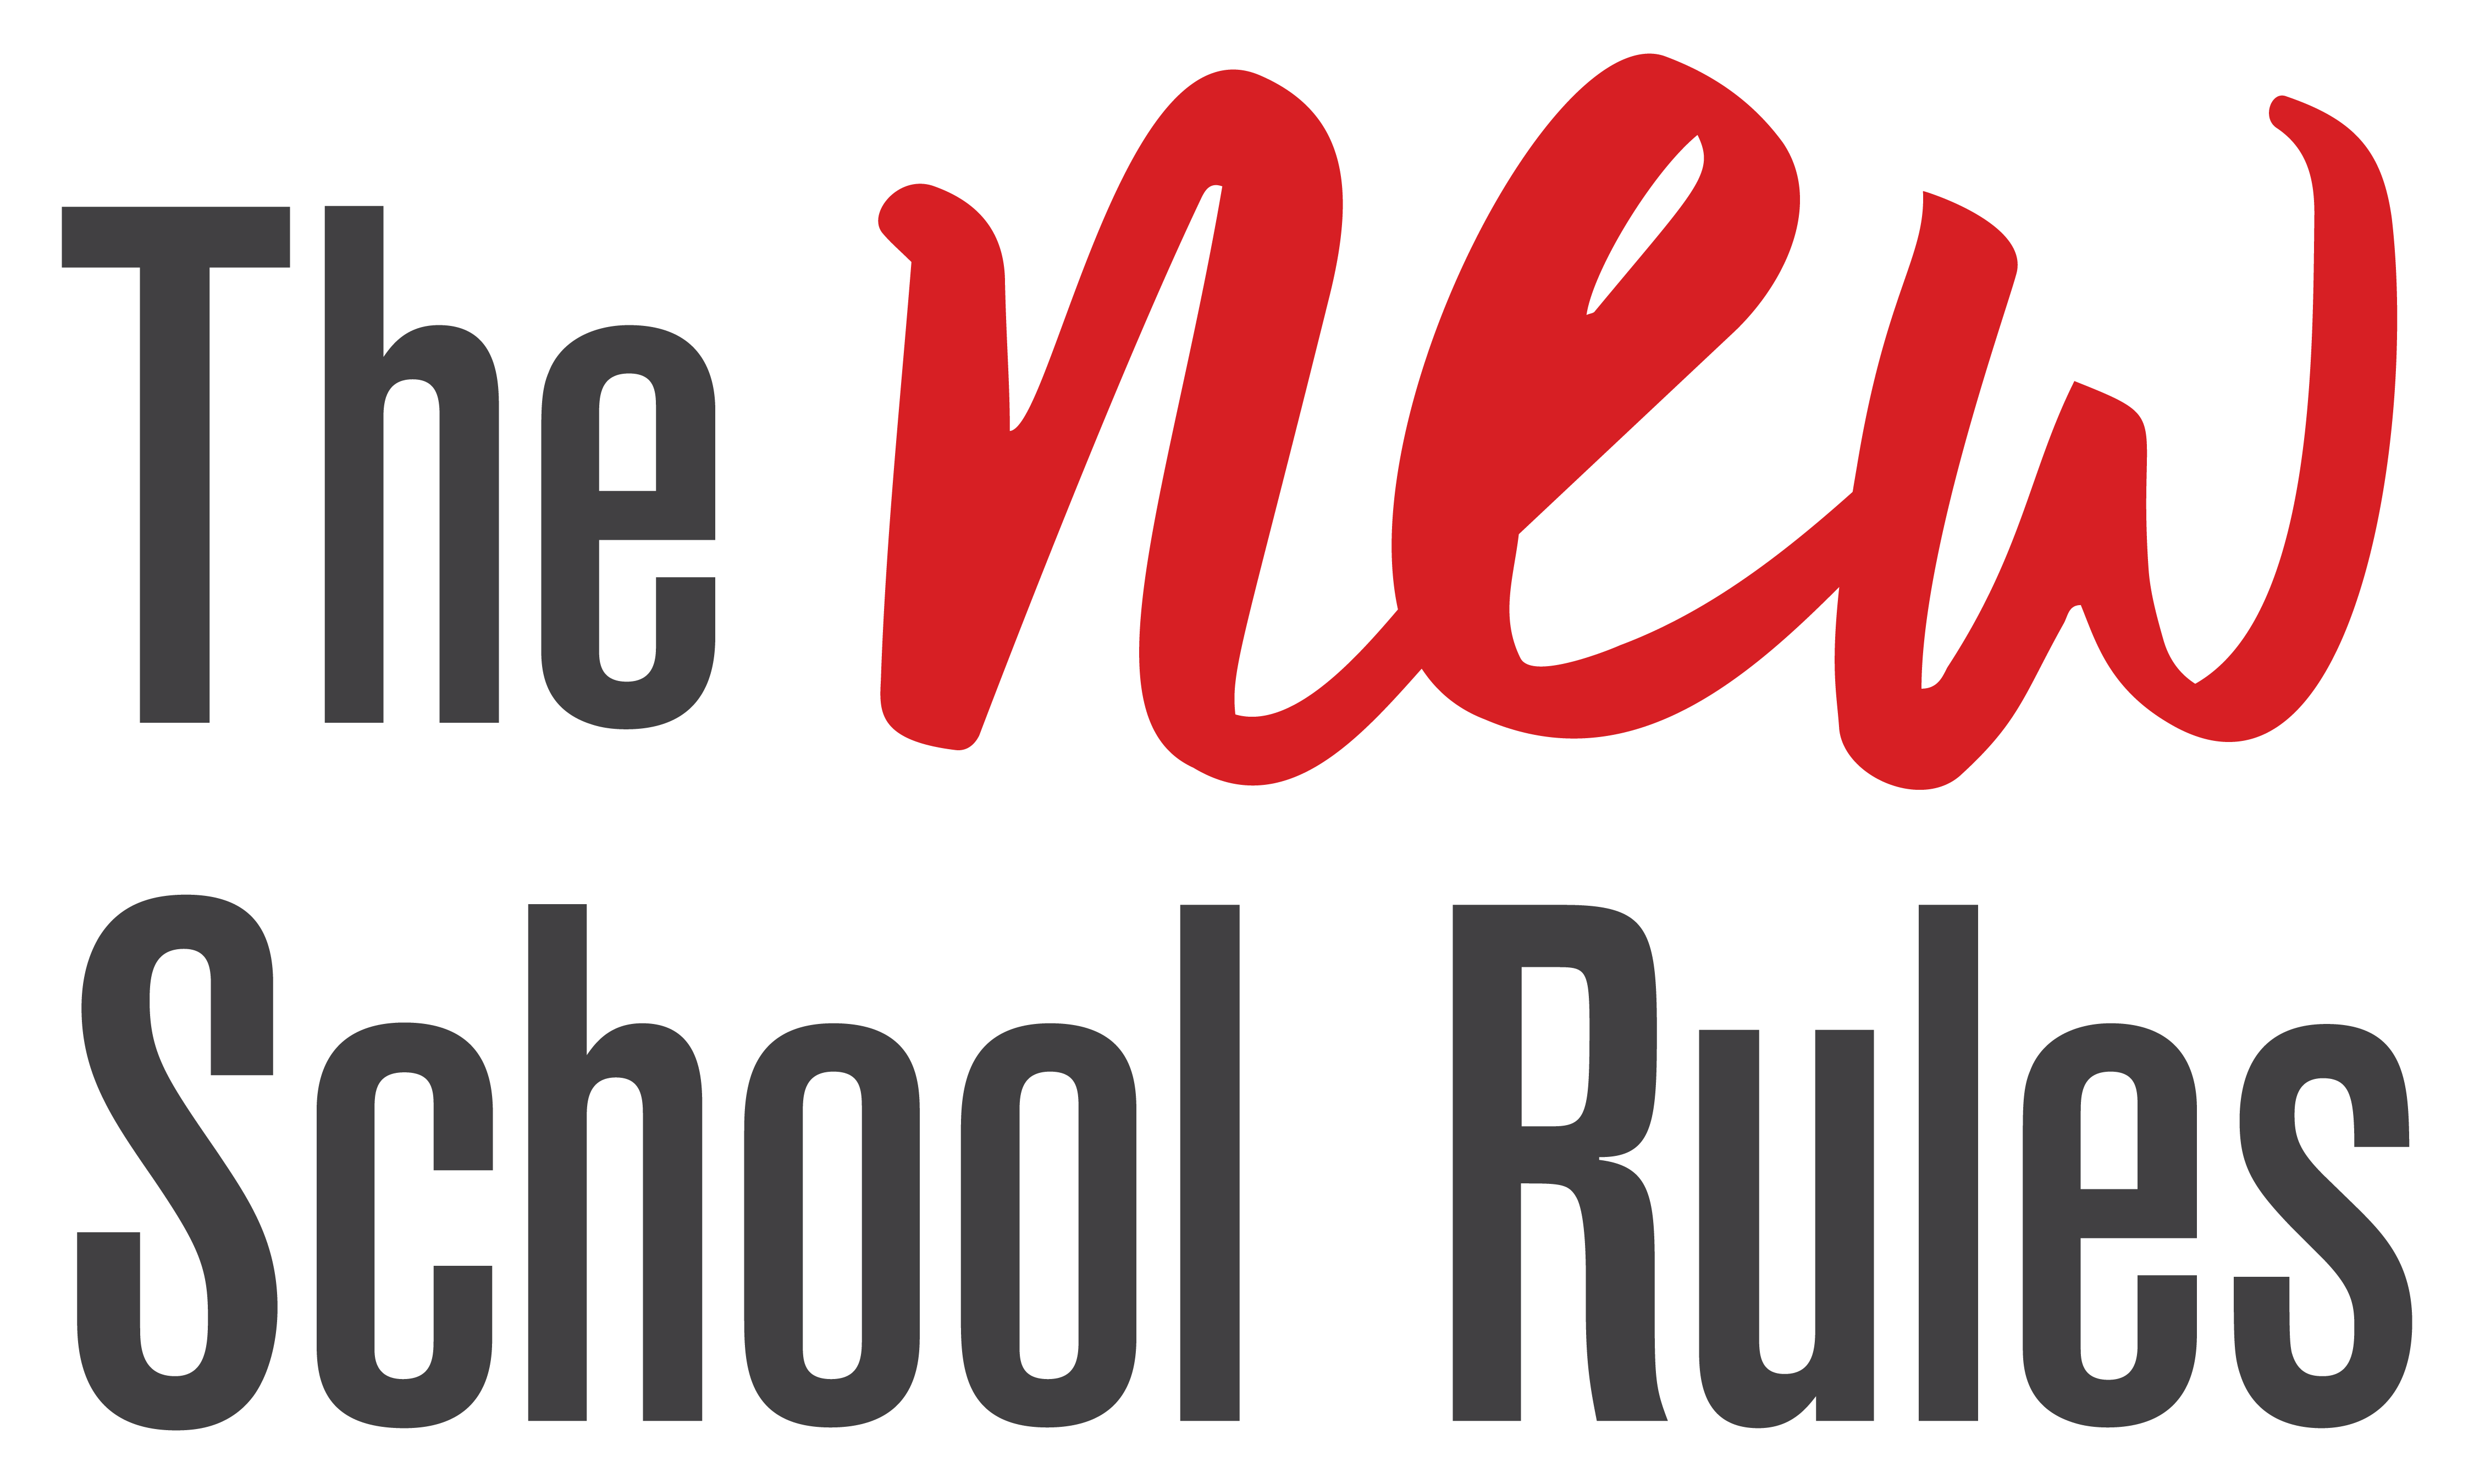 6 Rules The NEW School Rules